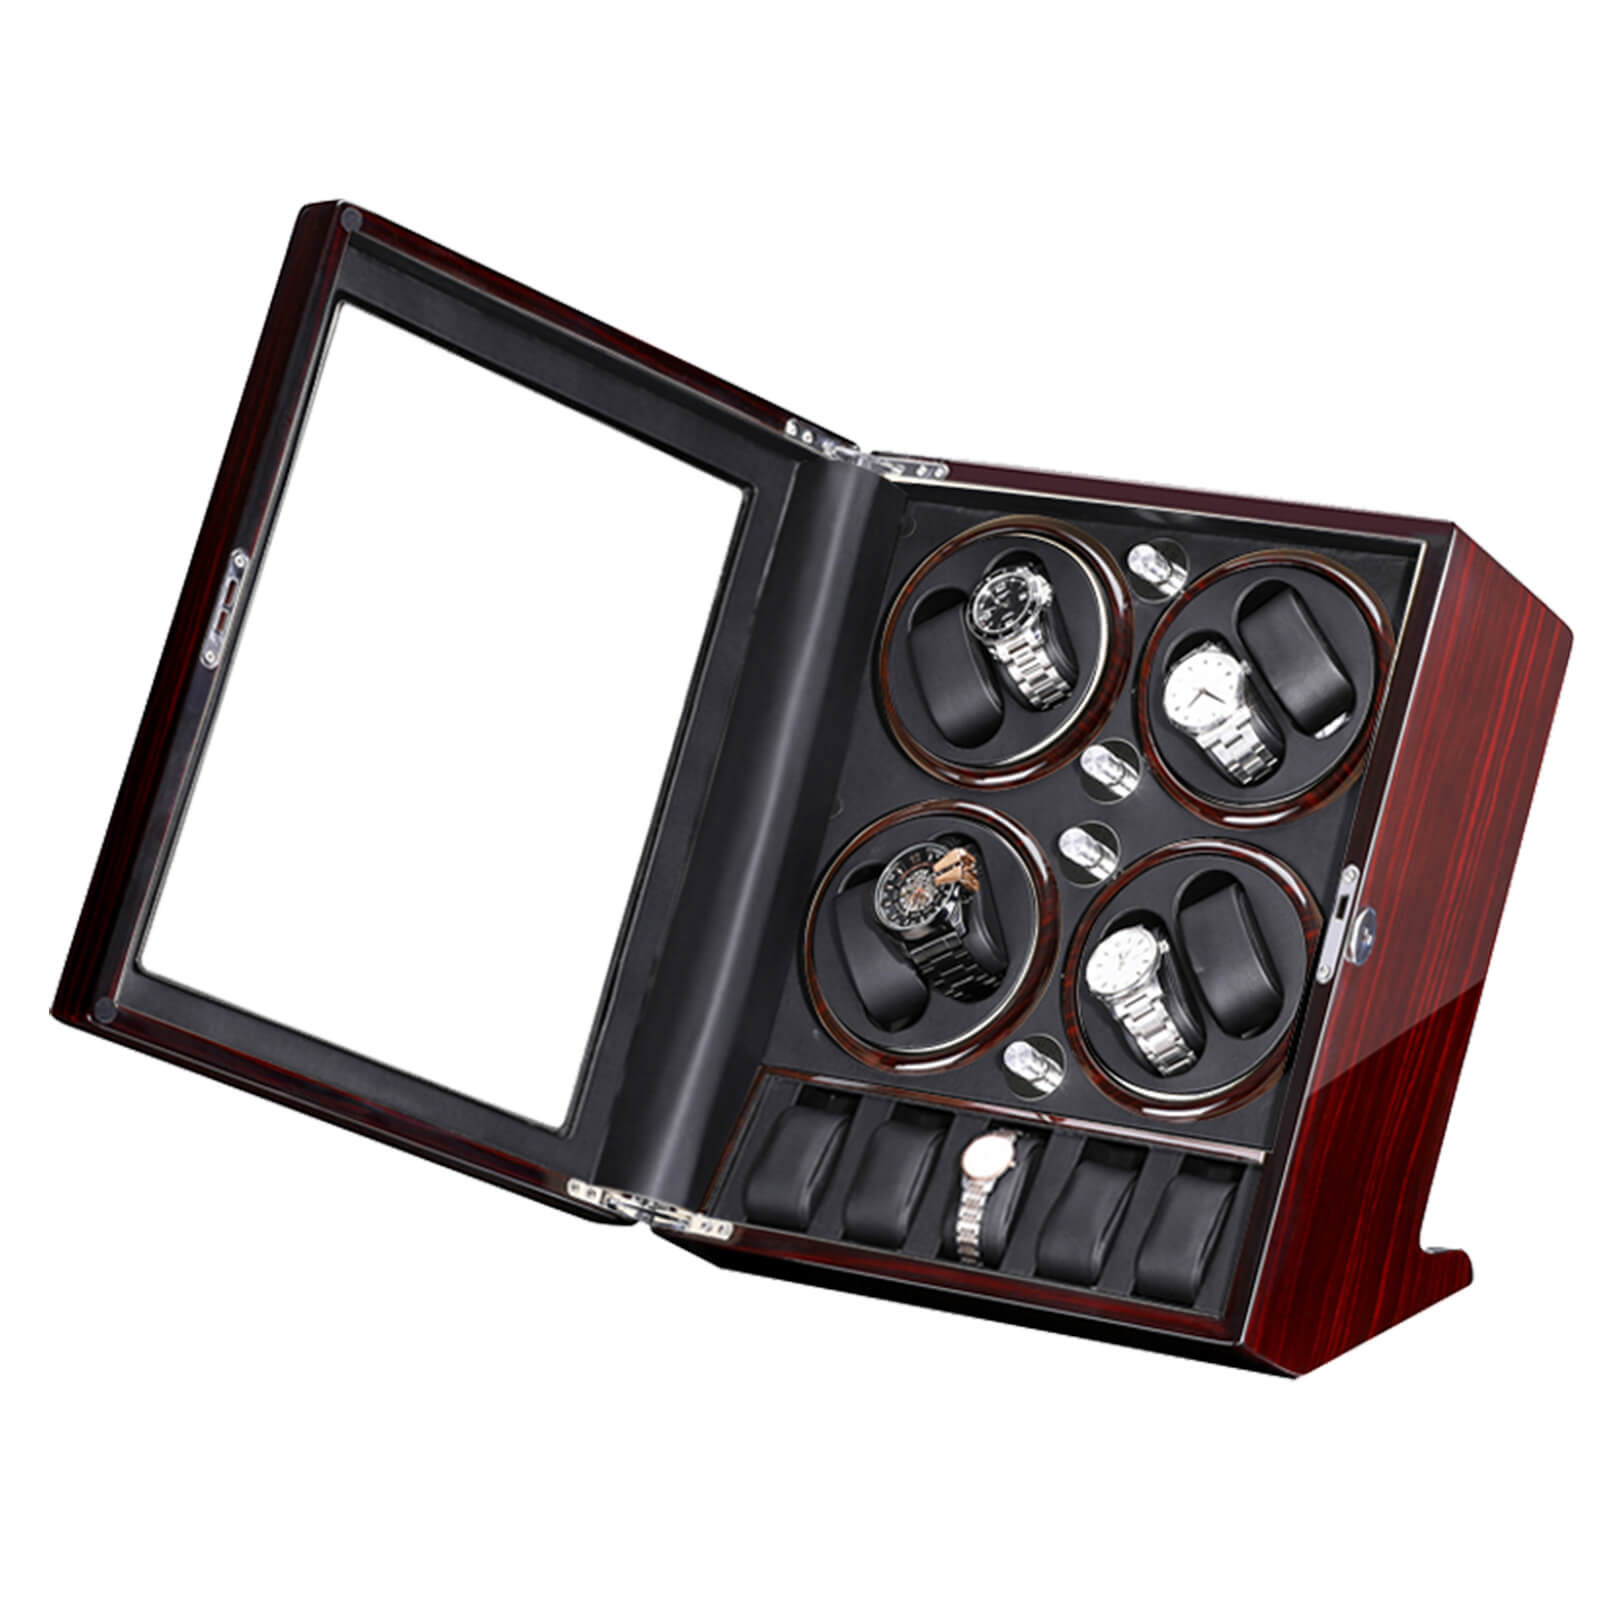 Modern Watch Winders for 8 Automatic Watches with 5 Display Storage Spaces Quiet Motor-Ebony&Black